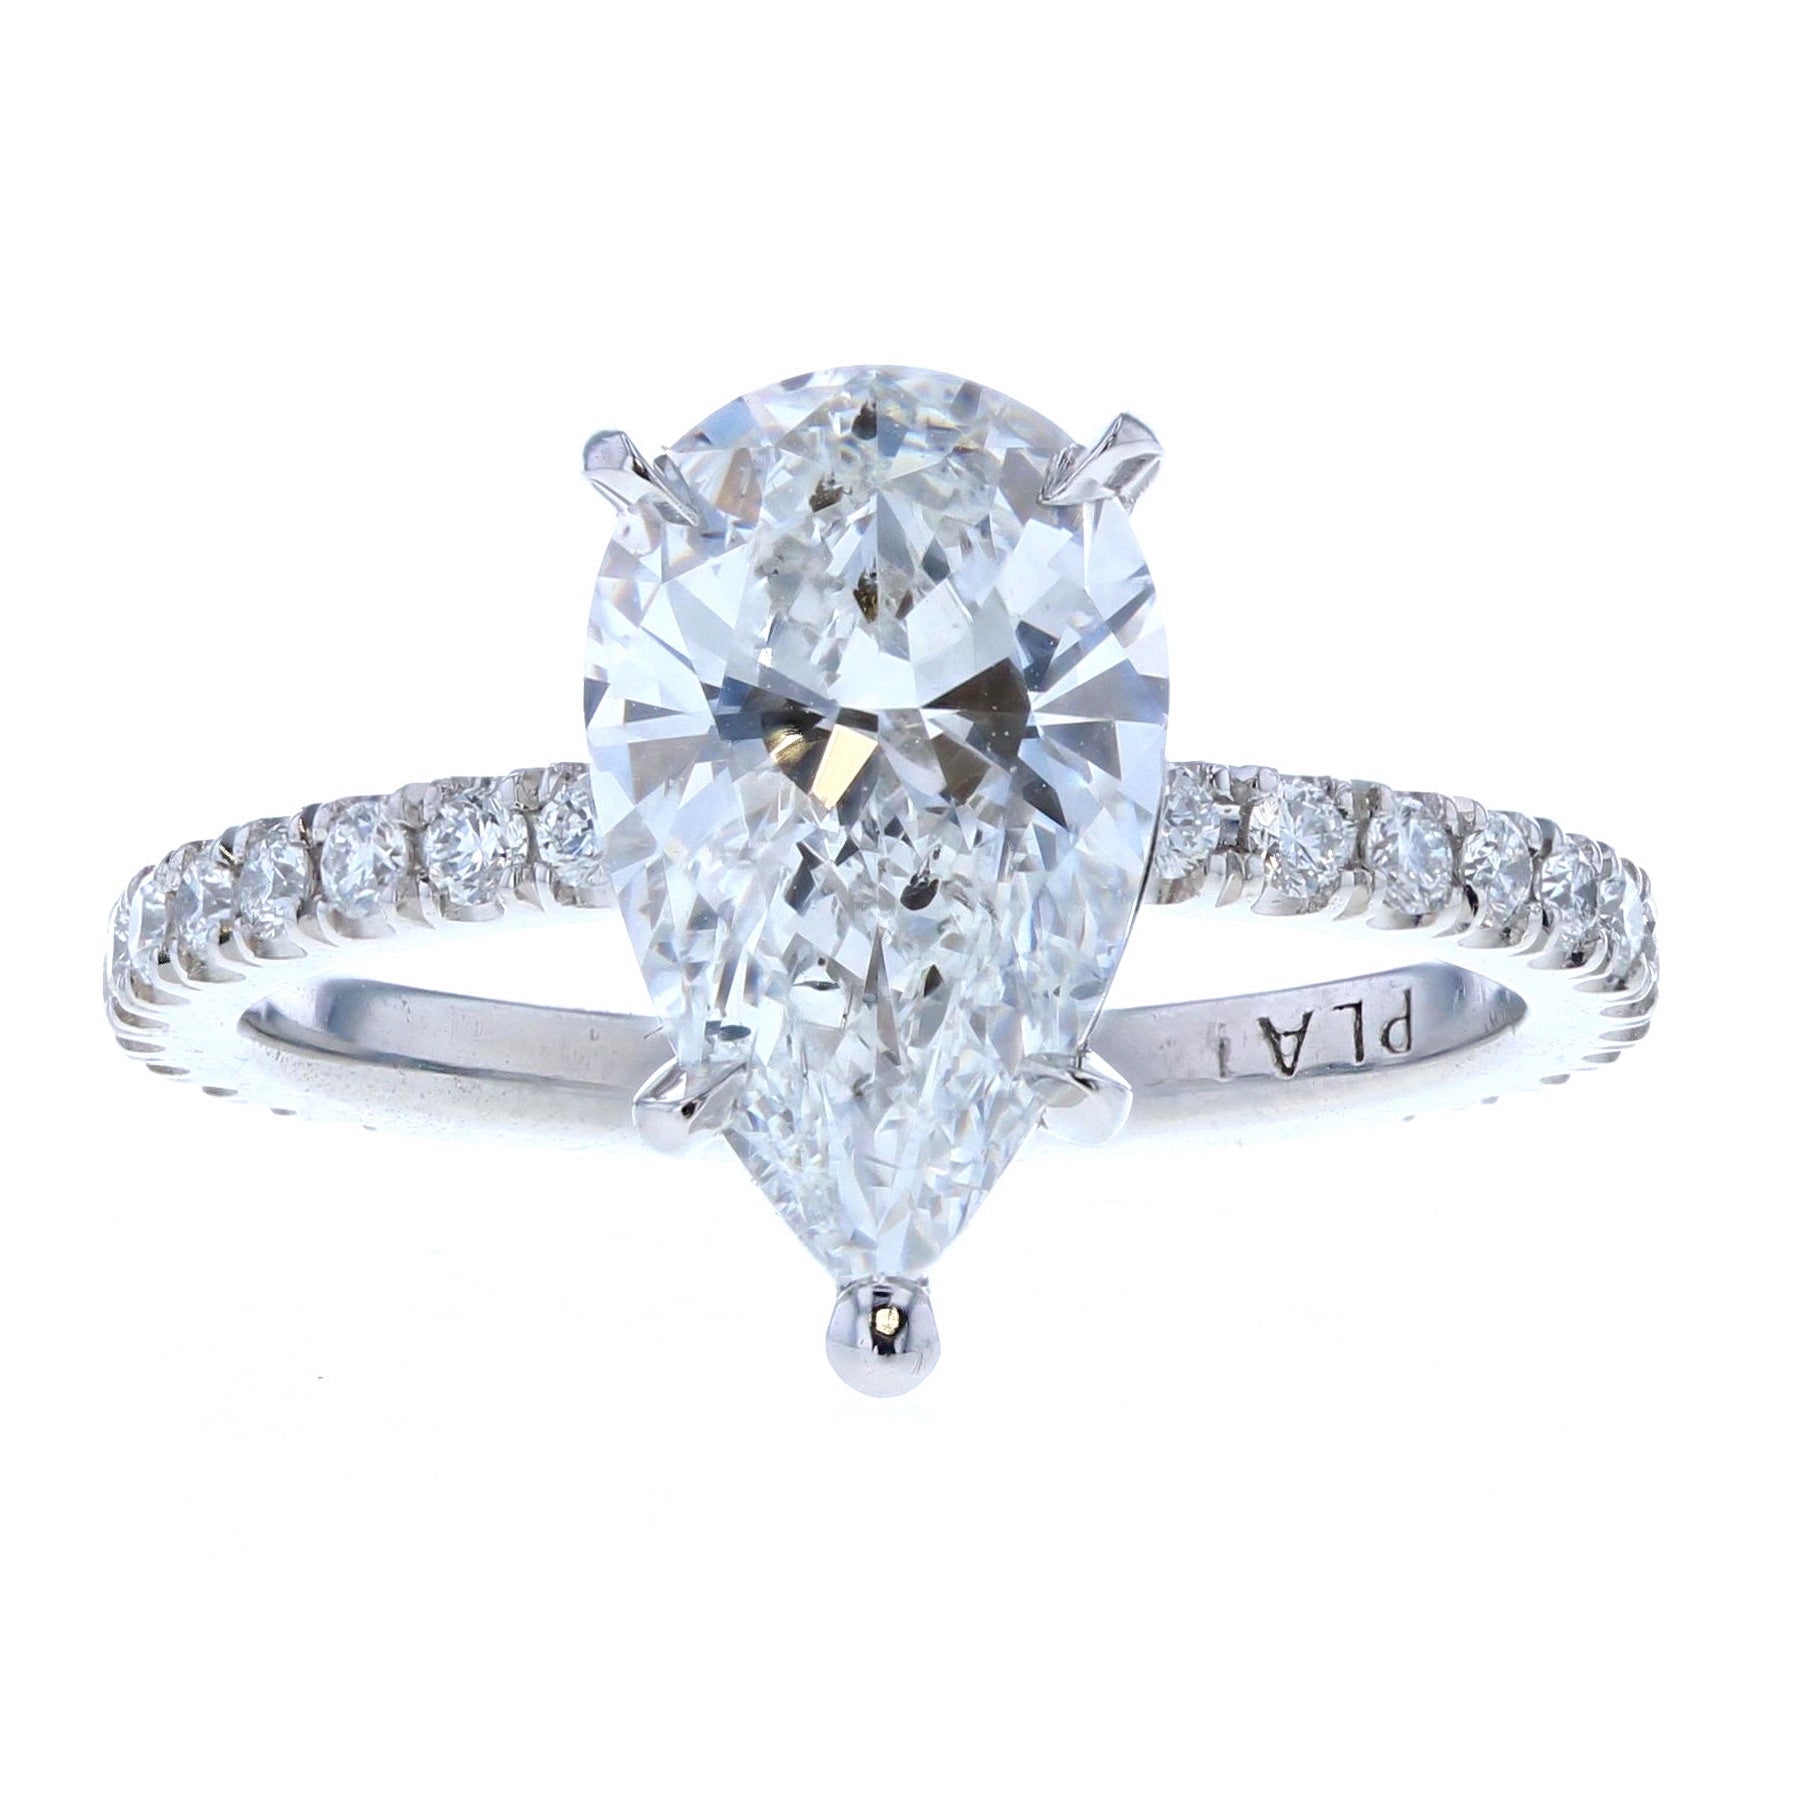 Pear Shaped Diamond Engagement Ring with Diamond Pave